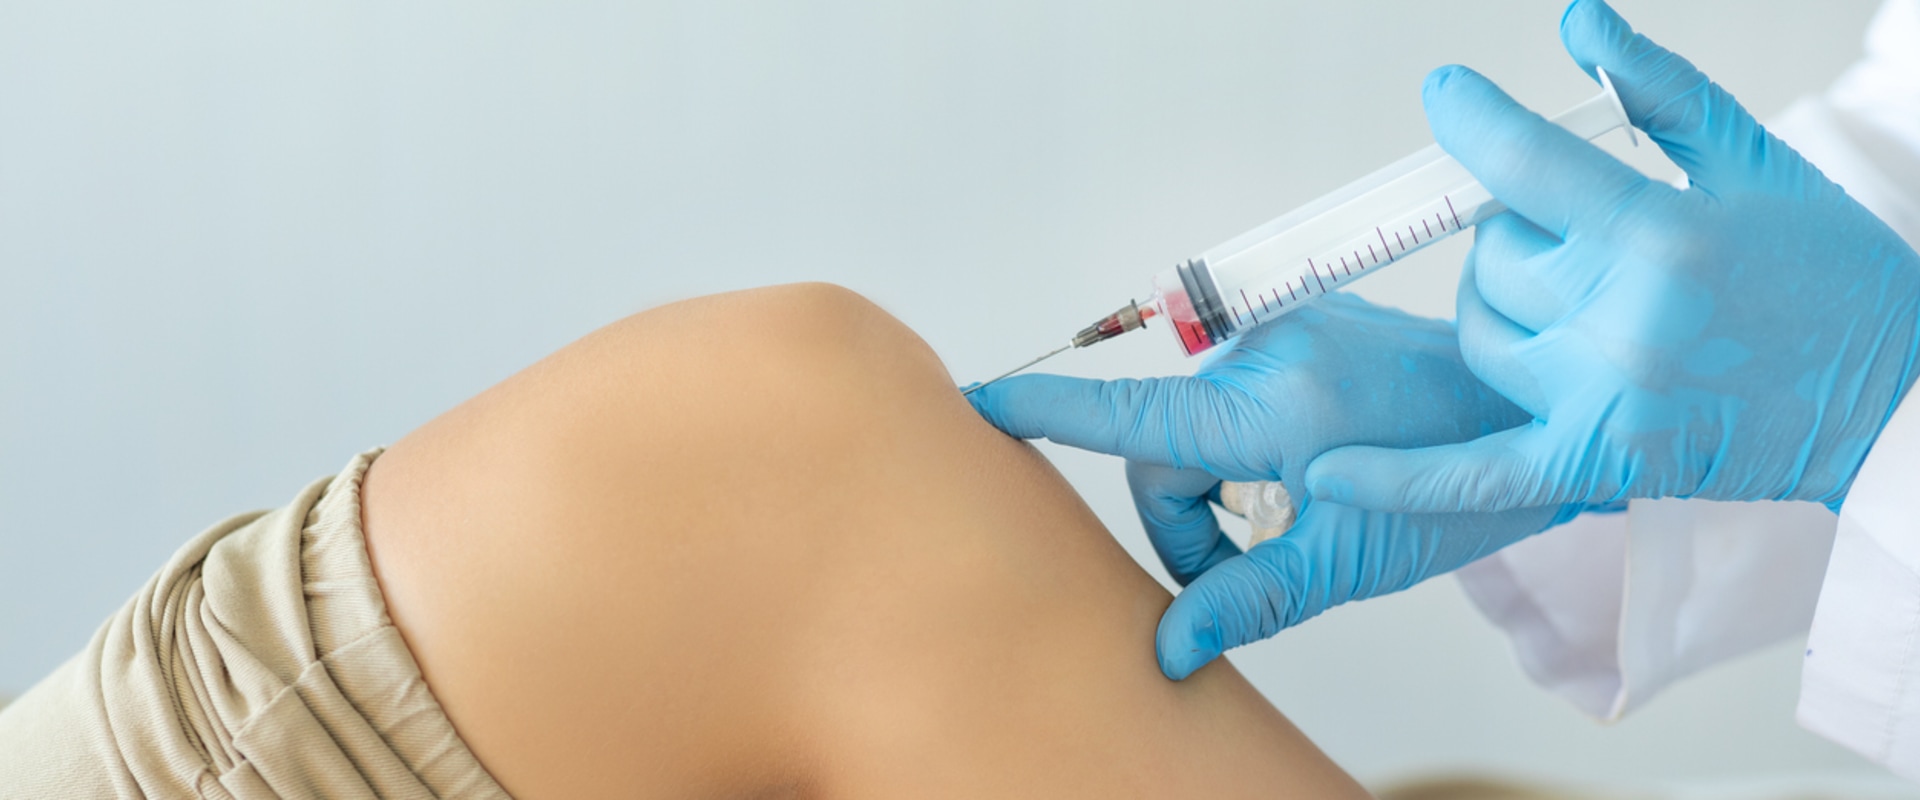 Who Can Benefit from PRP Injections Near Me?